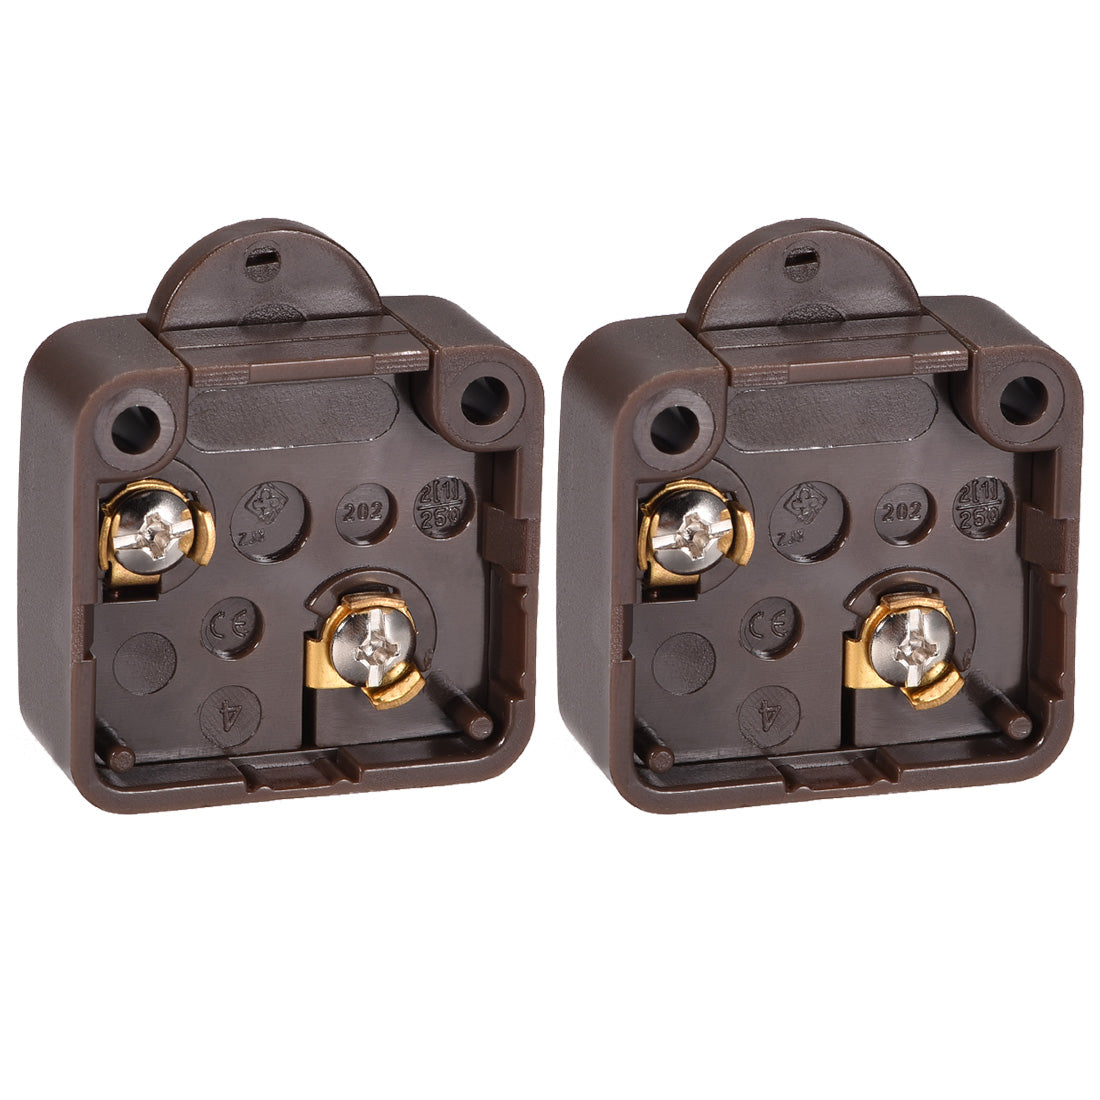 uxcell Uxcell Wardrobe Door Light Switch Momentary Cabinet Closet Switch Normally Closed 110-250V 2A Brown 2 Pcs